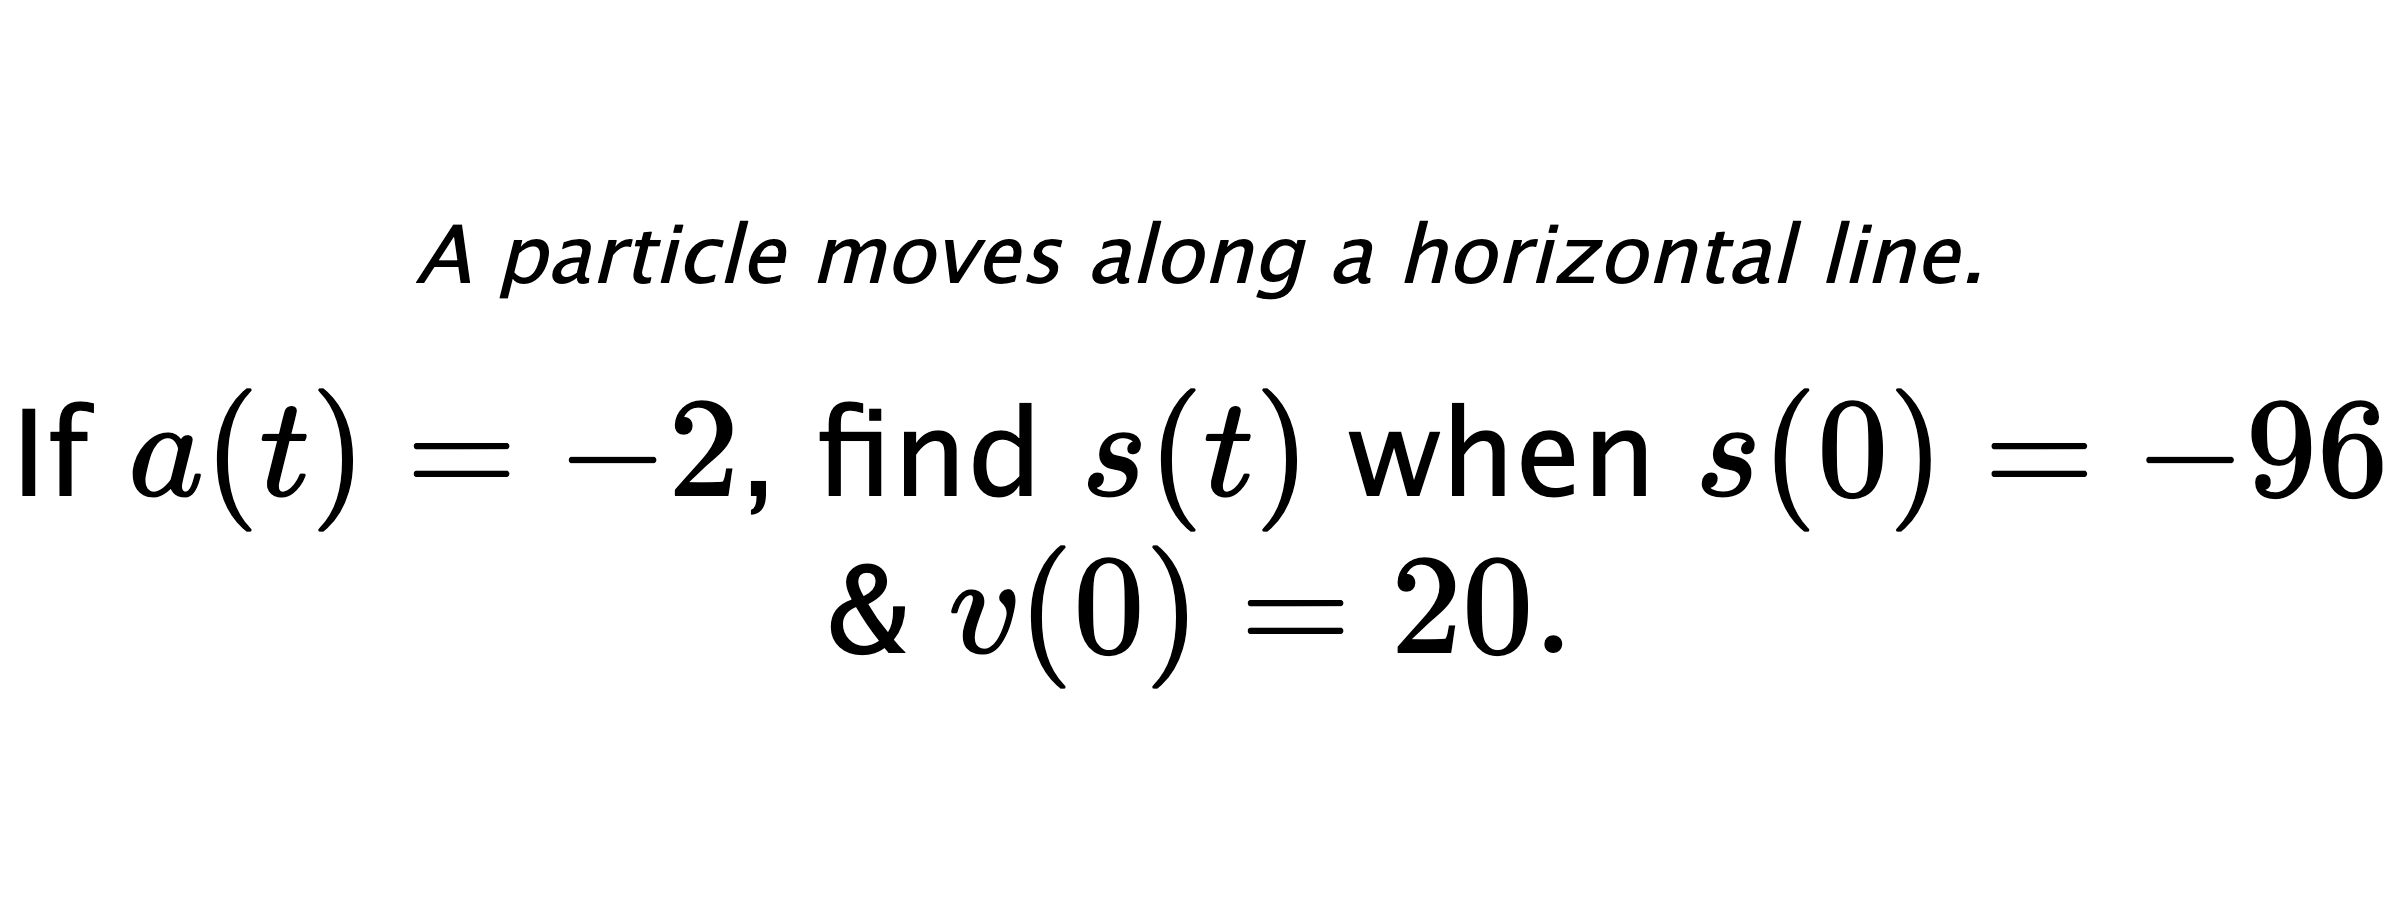 A particle moves along a horizontal line. If $ a(t)=-2 $, find $ s(t) $ when $ s(0)=-96 $ & $ v(0)=20 .$